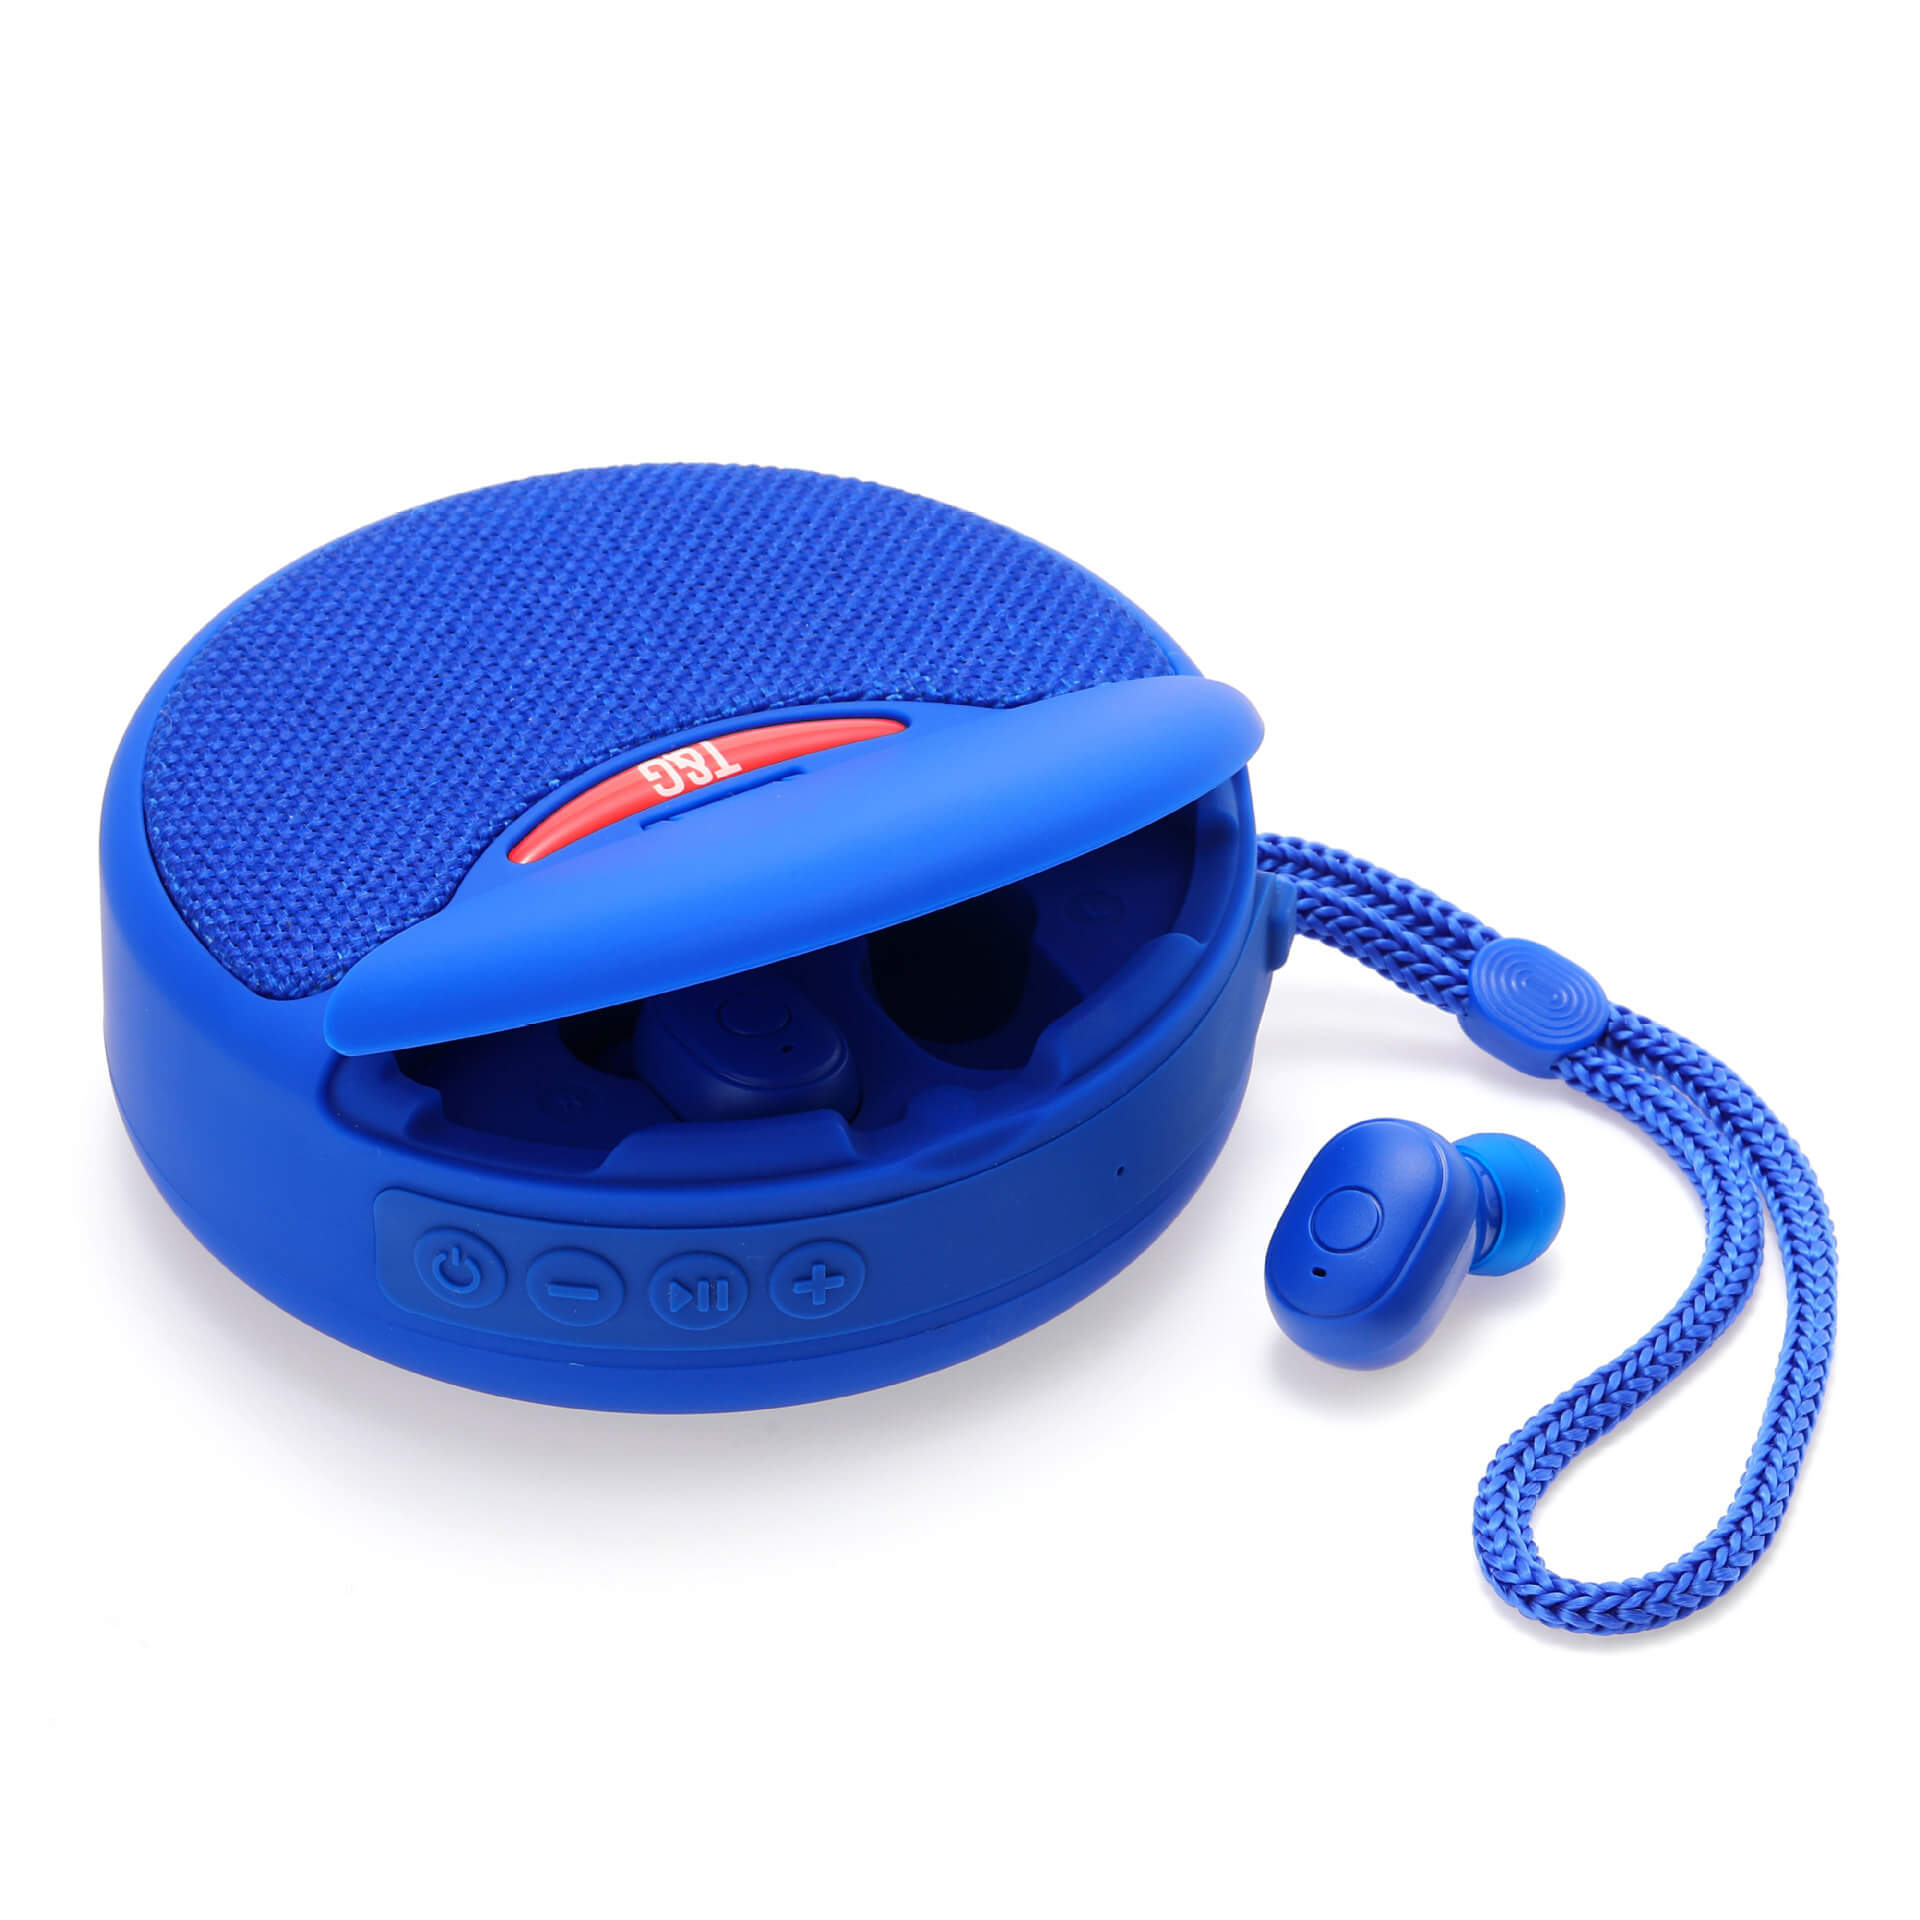 2 in 1 Outdoor Portable Mini Sound with Bluetooth Headphones